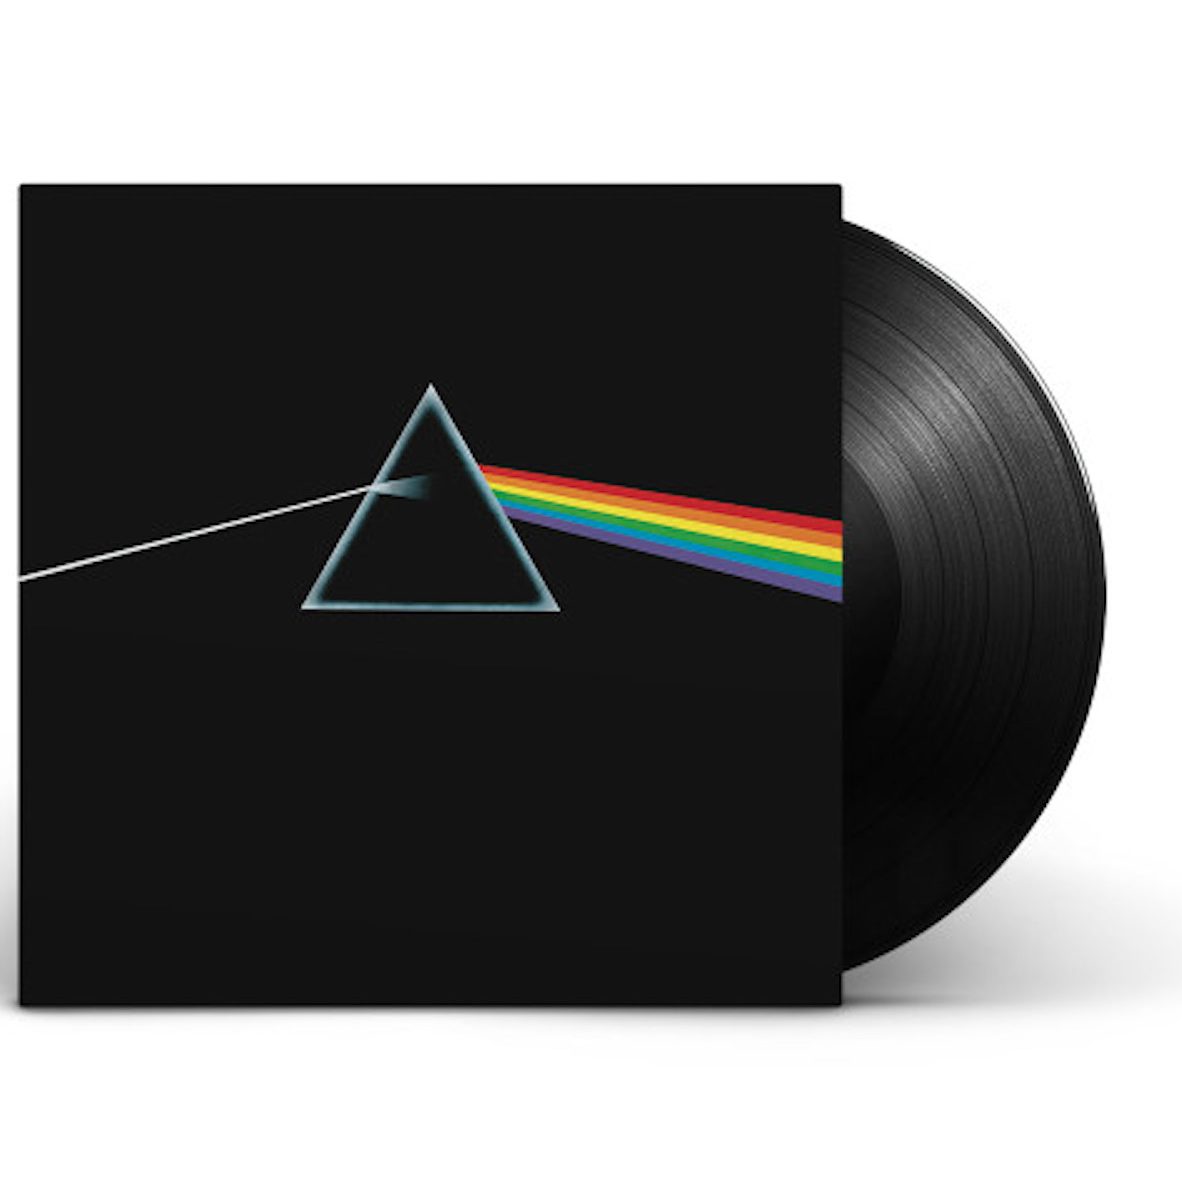 San Diego magazine holiday gift guide itemThe Dark Side of the Moon by Pink Floyd from Vinyl Junkies, a rock record collection essential